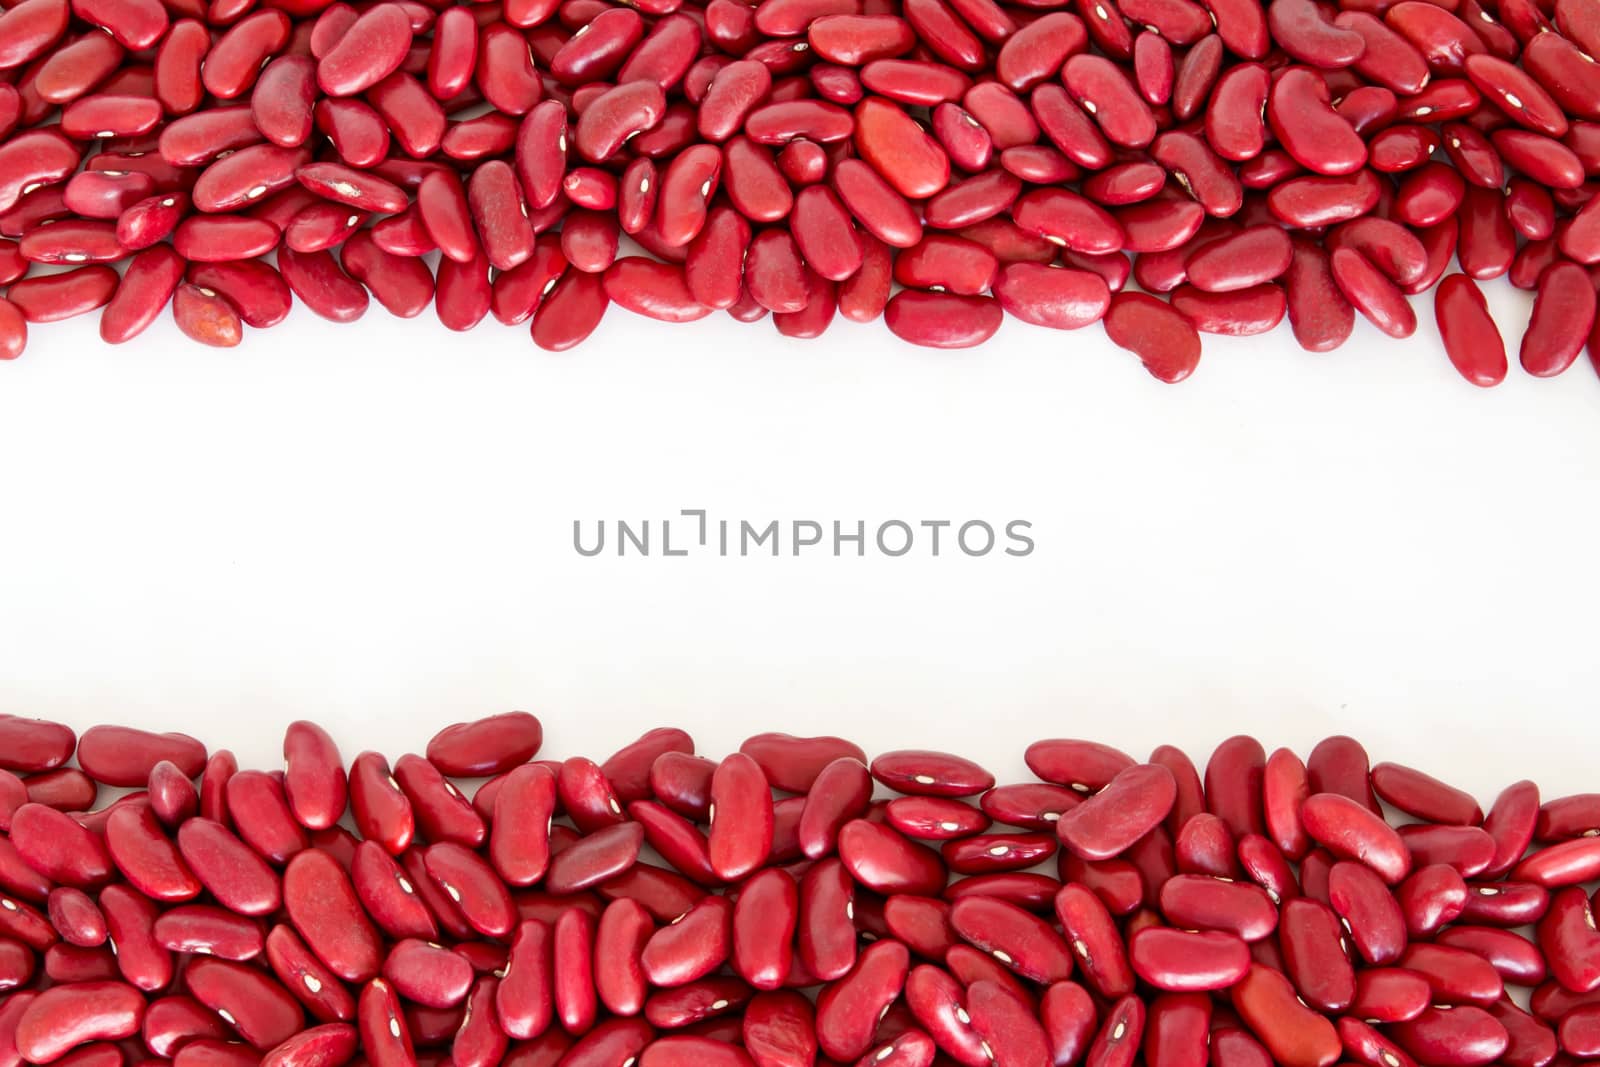 Rad beans stripes isolated in white background